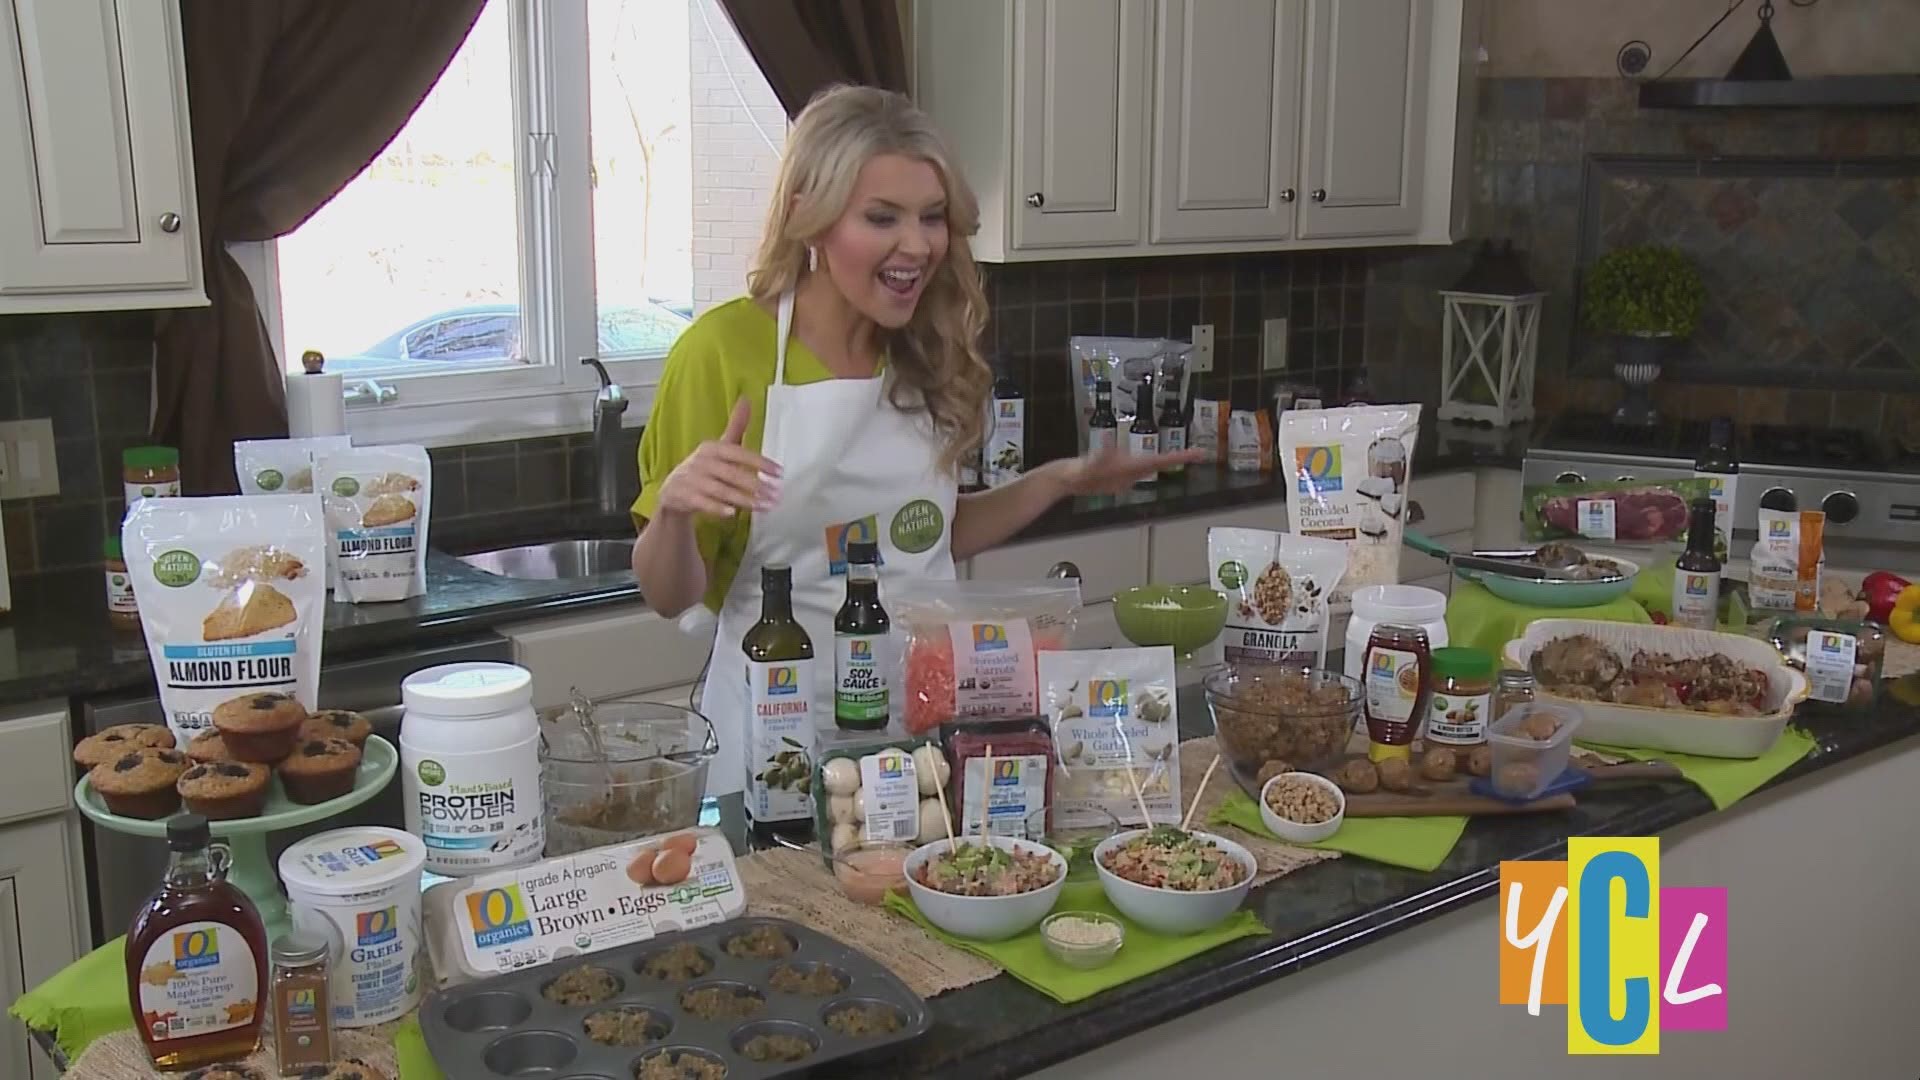 Make meals in minutes for the whole family with Registered Dietitian Annessa Chumbley. 
This segment was paid for by Safeway.